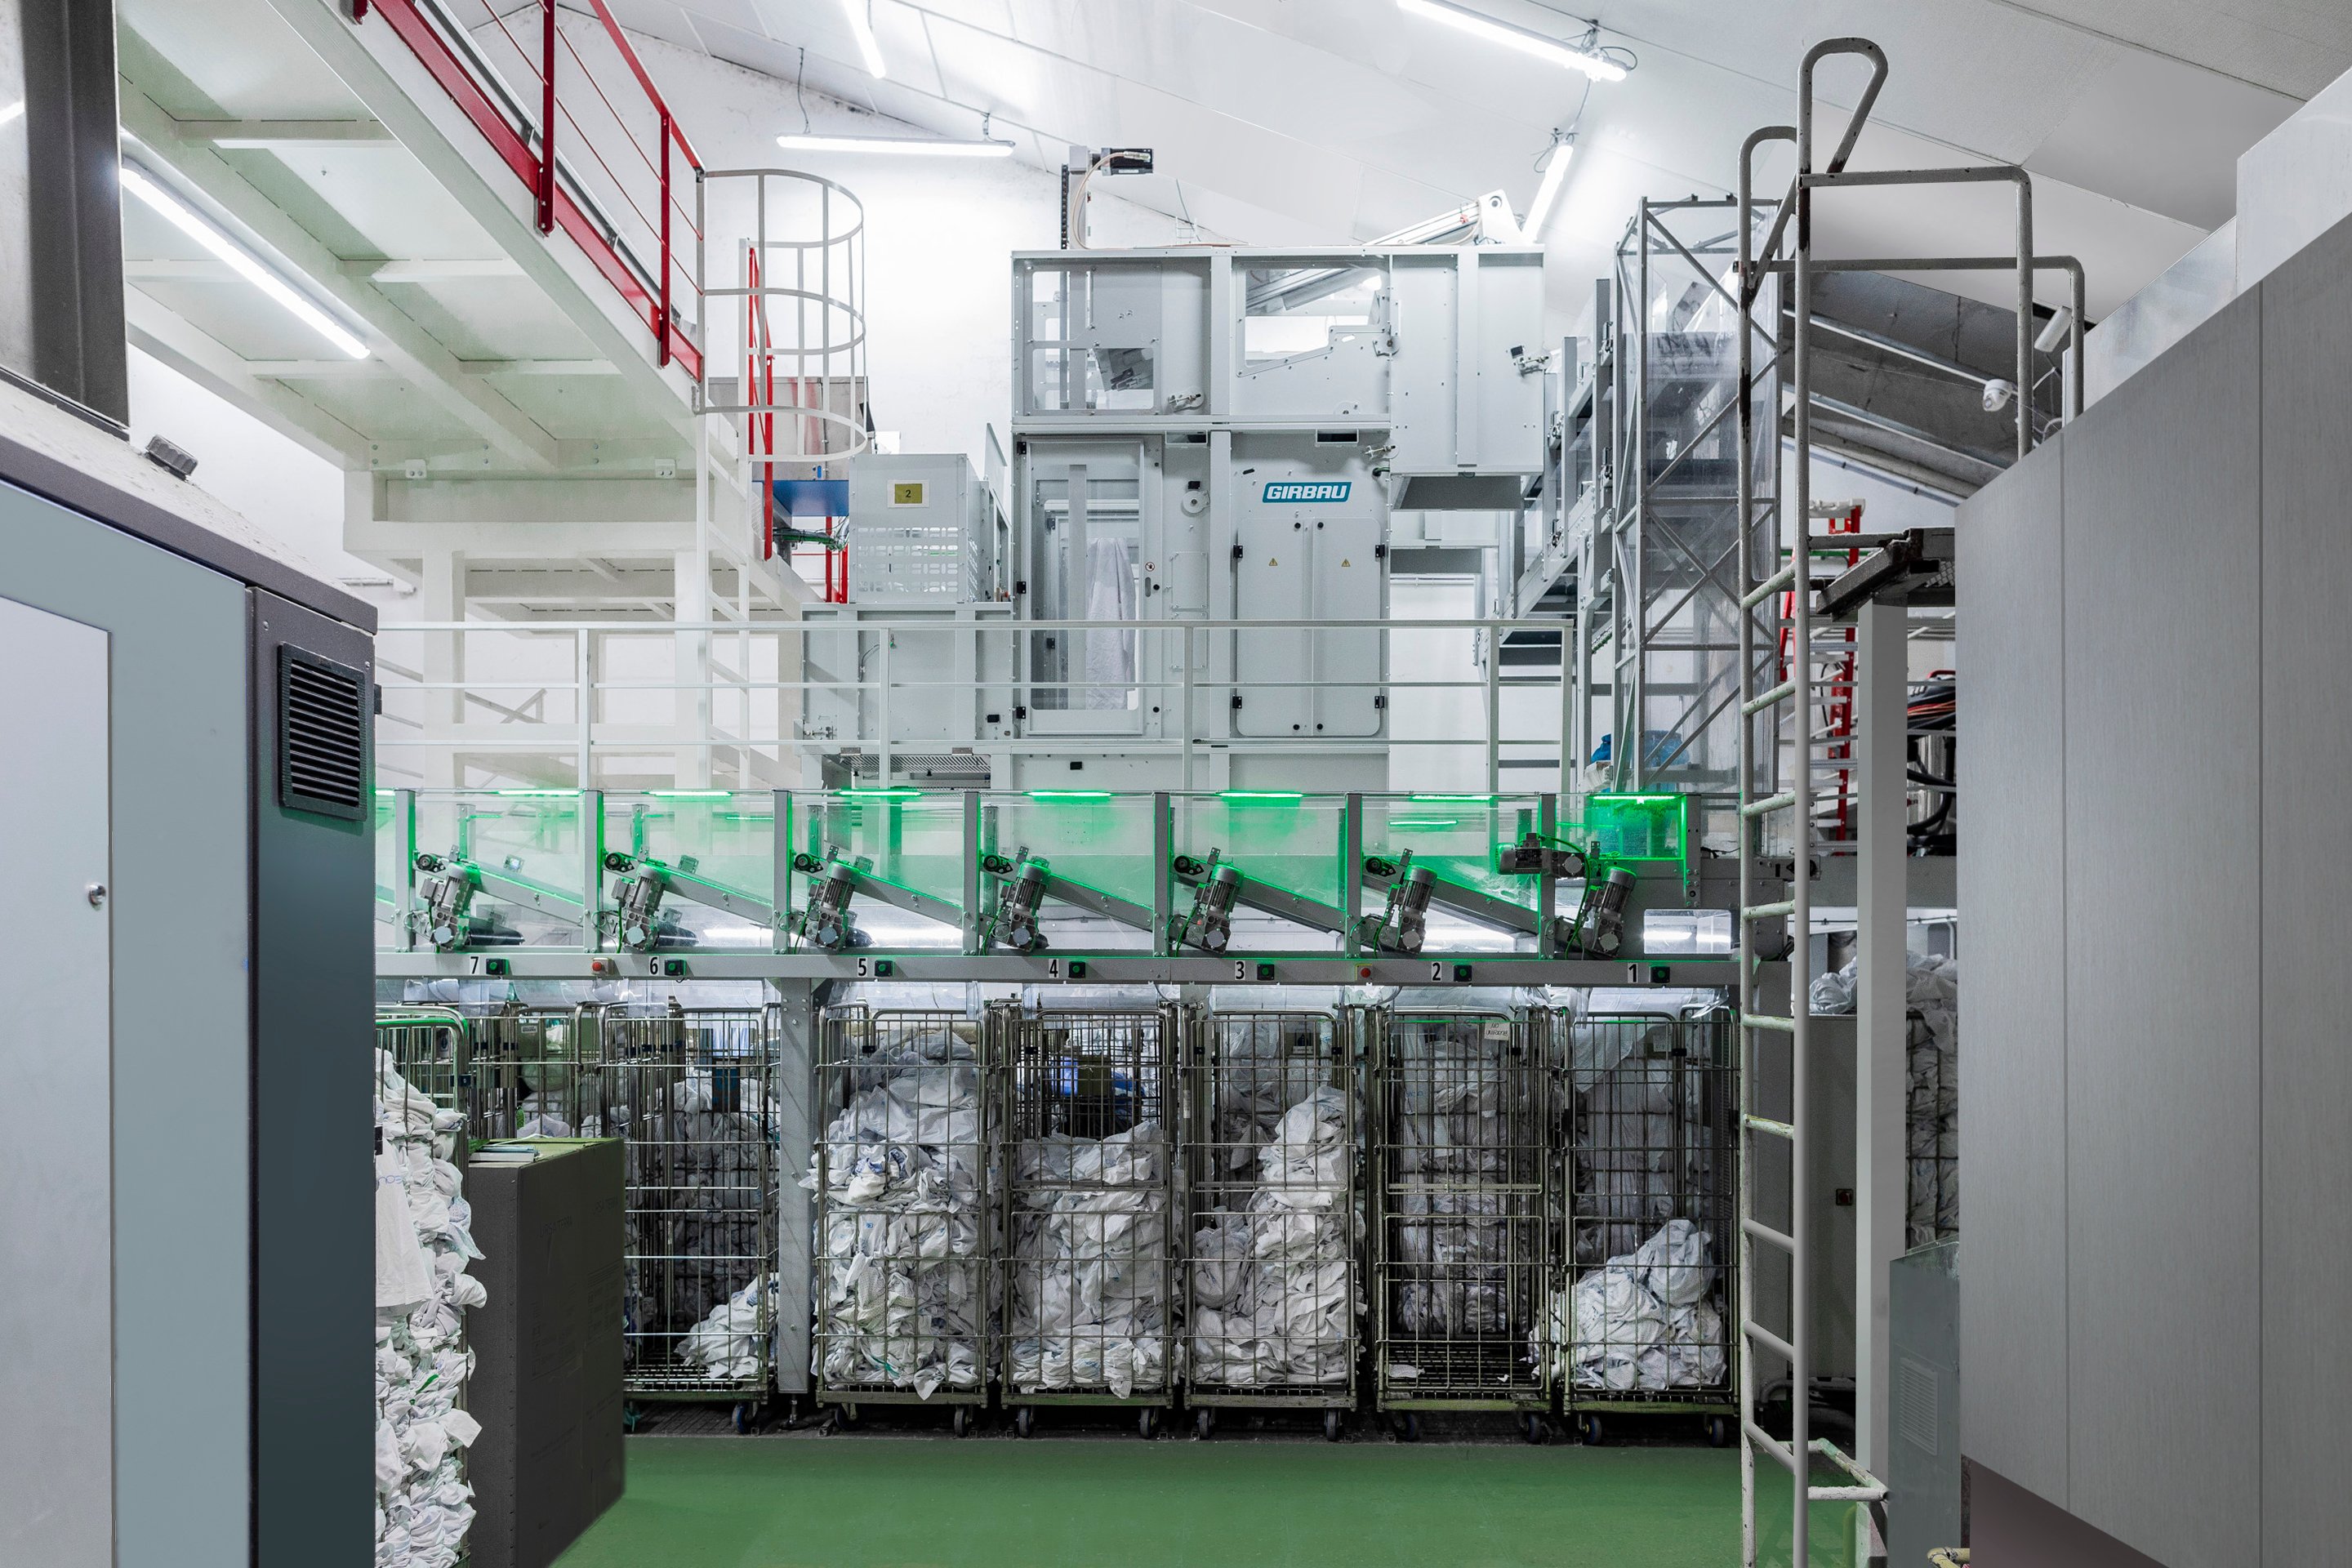 Sorting system of linen in different trolleys at an Industrial Laundry